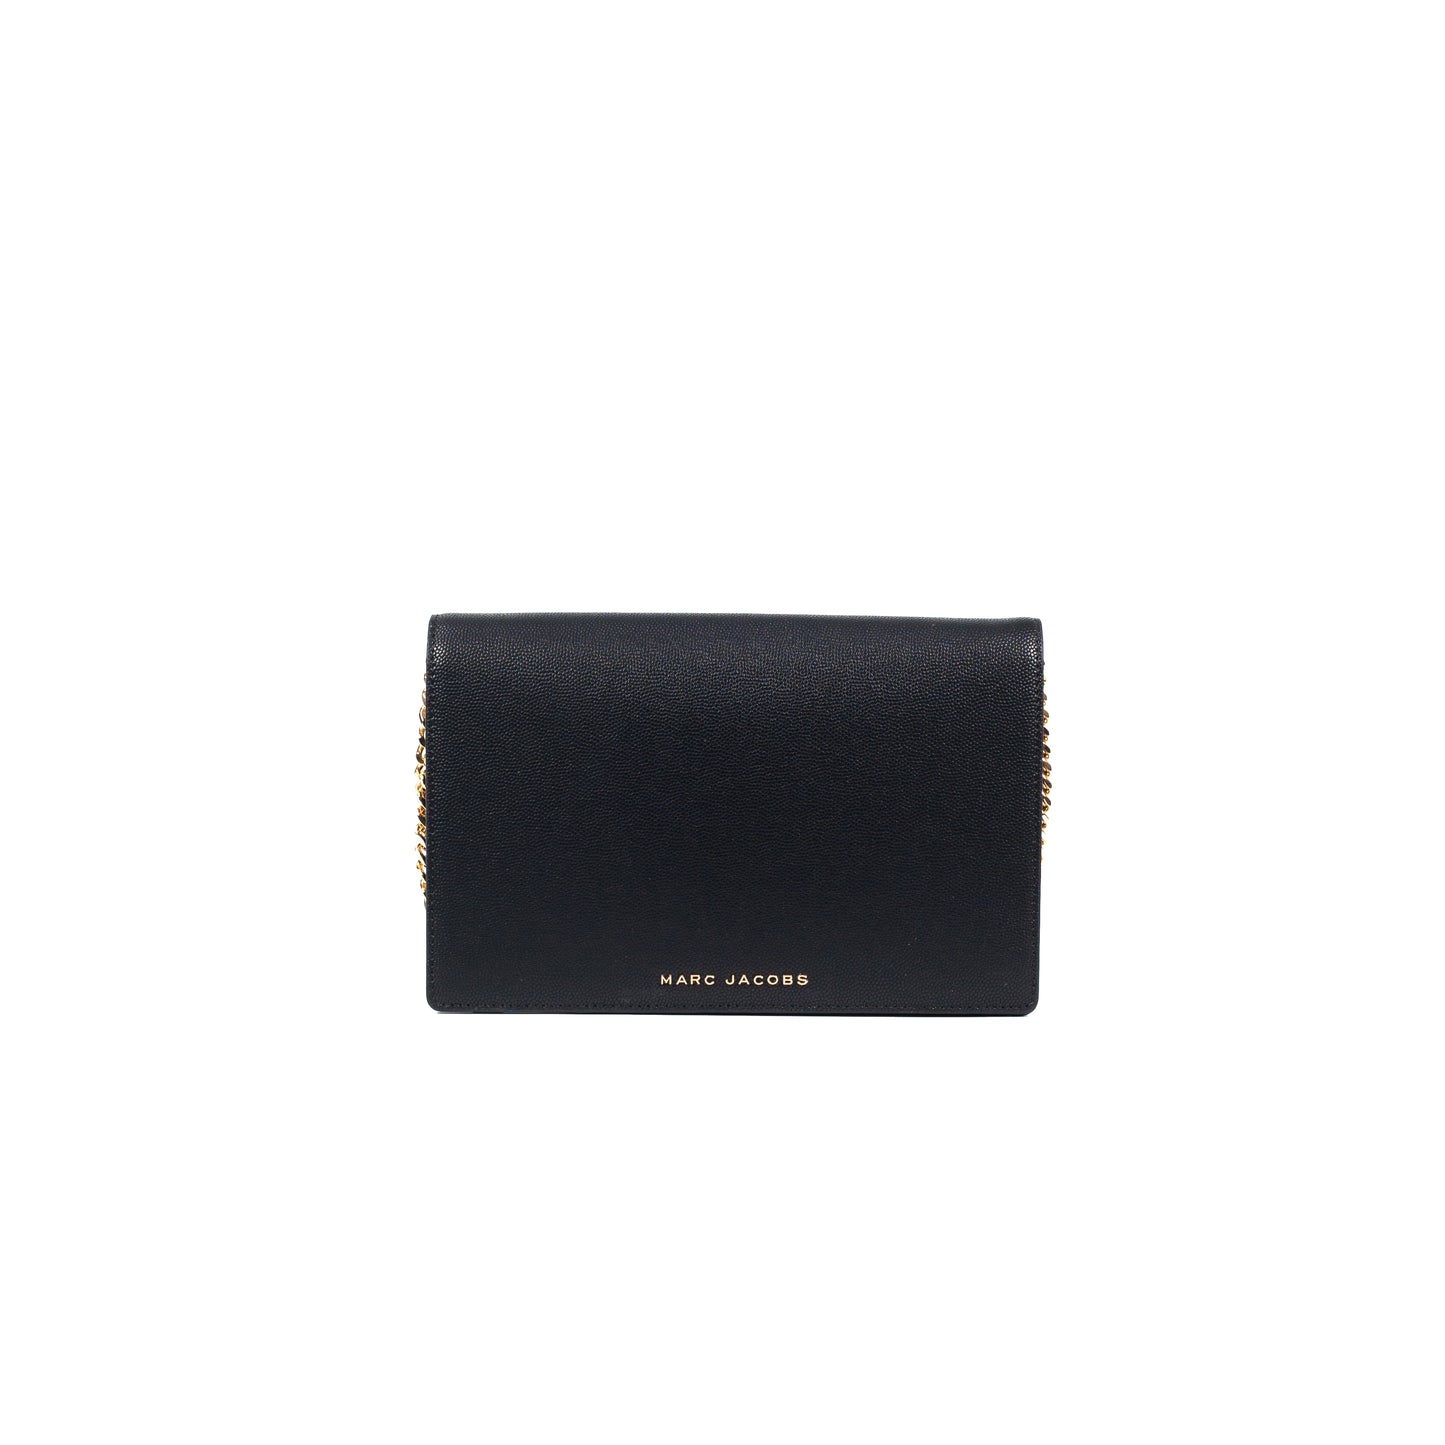 Marc Jacobs Women's Black Faux Leather Chain Crossbody Bag Snap-Flap Closure Goldtone Hardware Interior Card Slots Interior Slip Pockets Interior Zip Pocket Textile Lining Synthetic Material